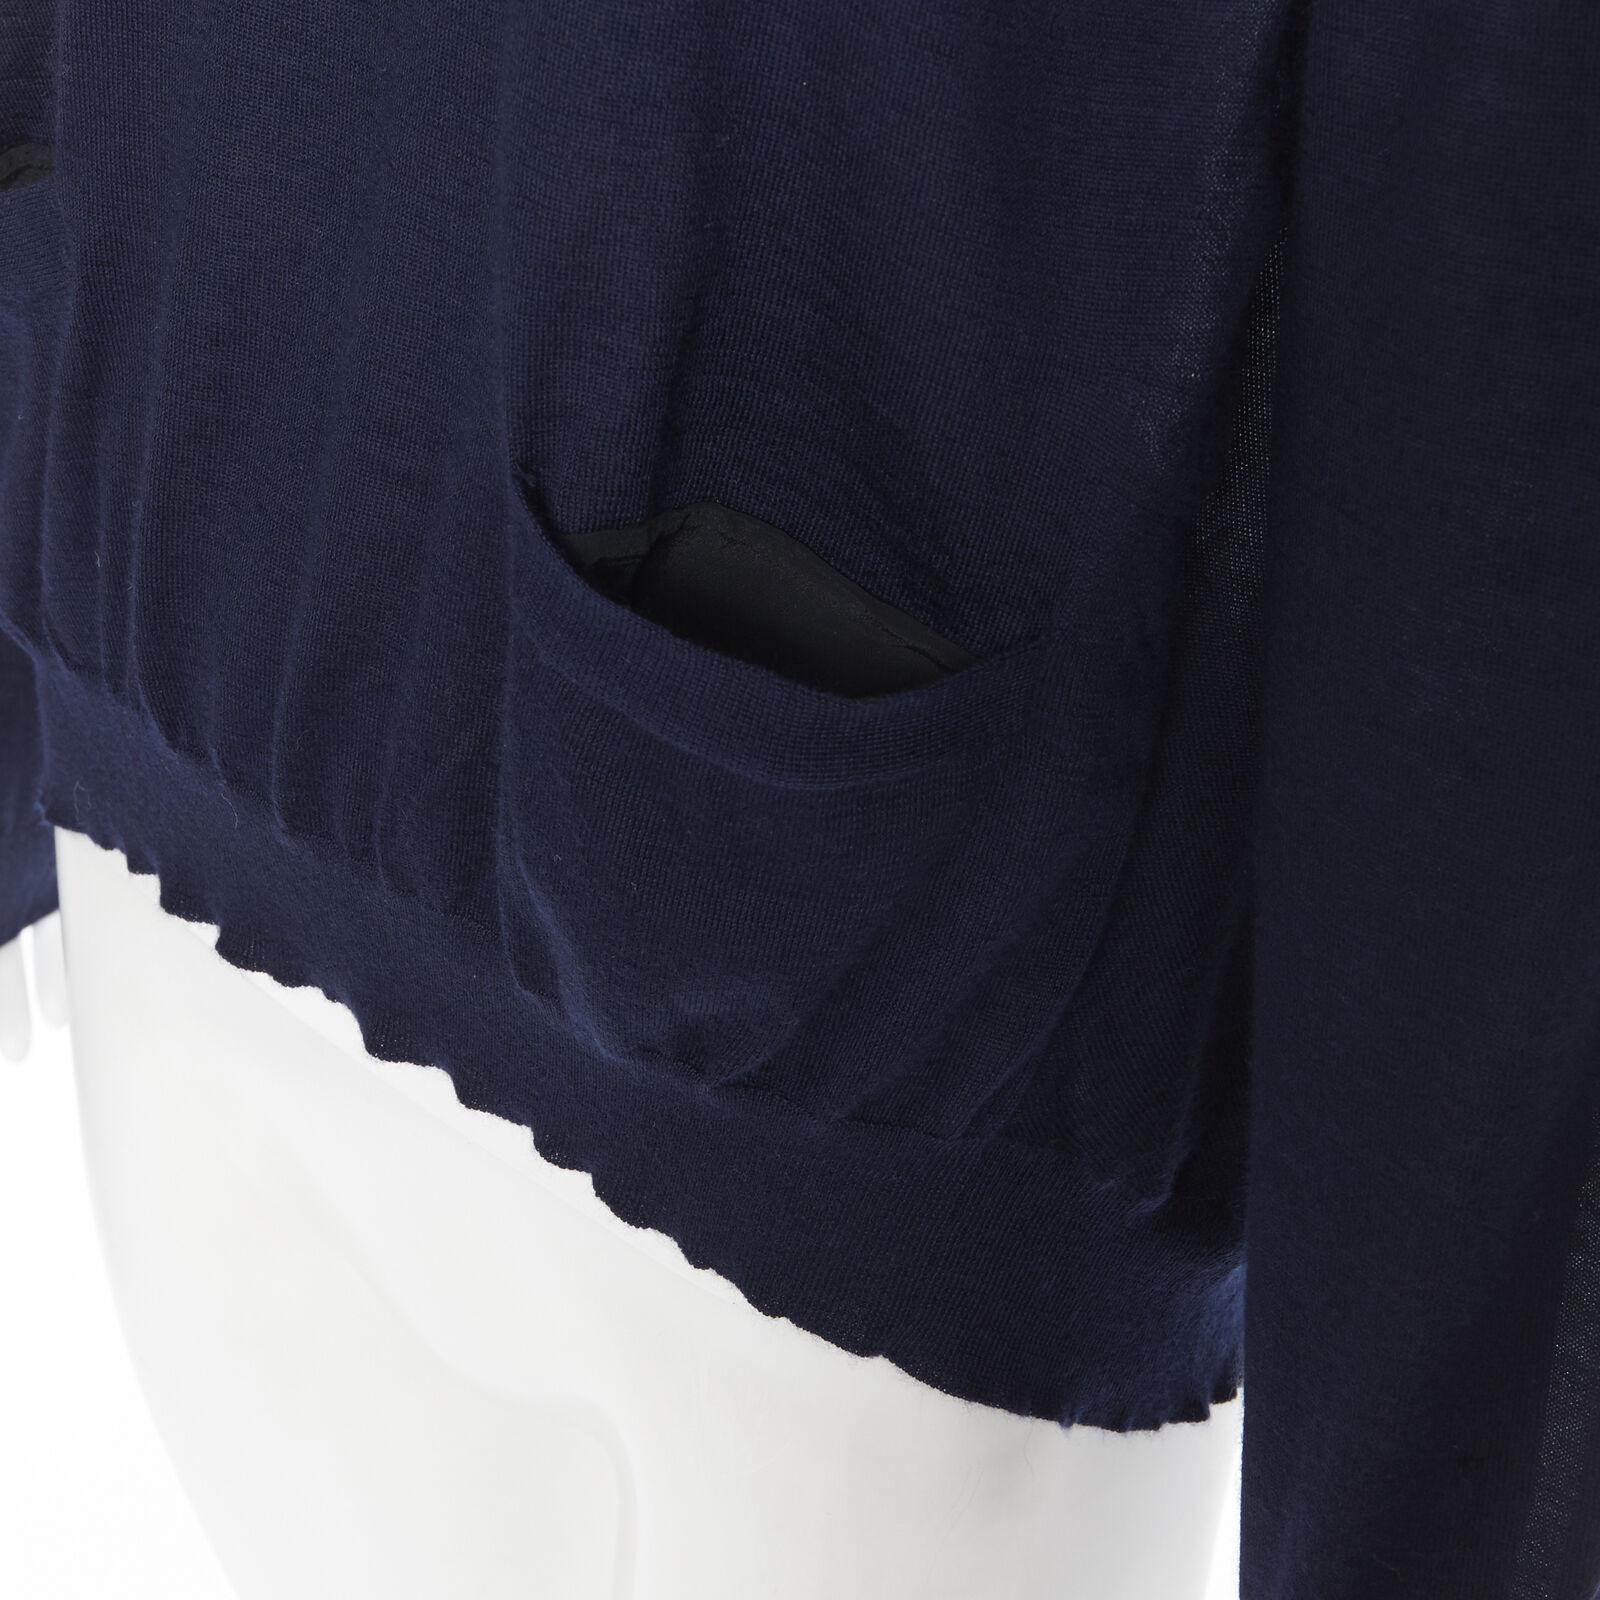 MARNI navy blue cashmere dual front slit pocket long sleeve sweater IT40 S
Reference: SNKO/A00072
Brand: Marni
Material: Cashmere, Blend
Color: Navy
Pattern: Solid
Extra Details: Cashmere blend sweater. Dual slit pocket design at front.
Made in: